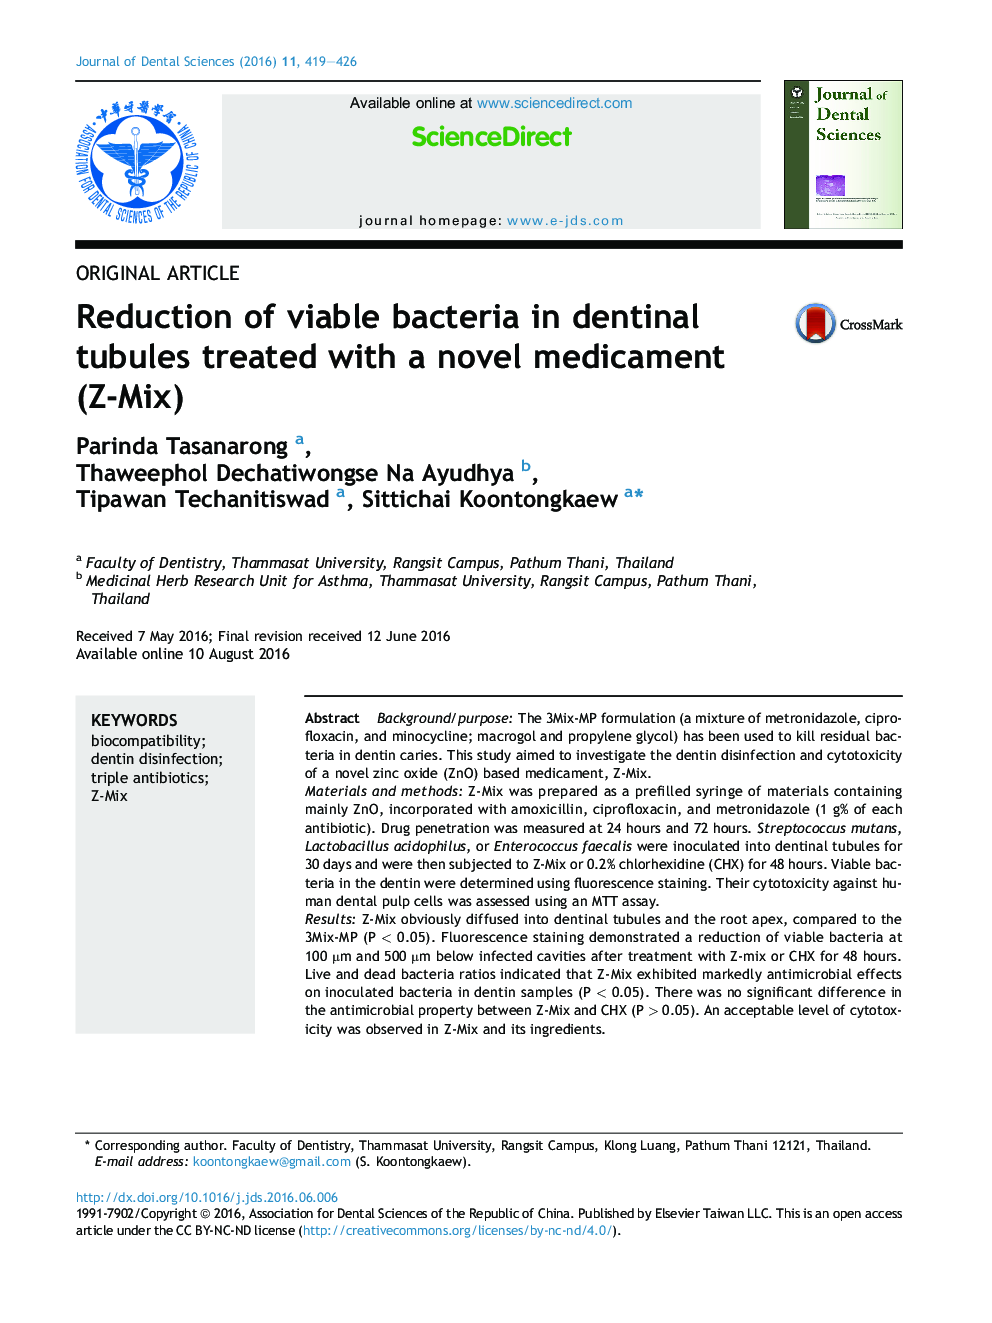 Reduction of viable bacteria in dentinal tubules treated with a novel medicament (Z-Mix)